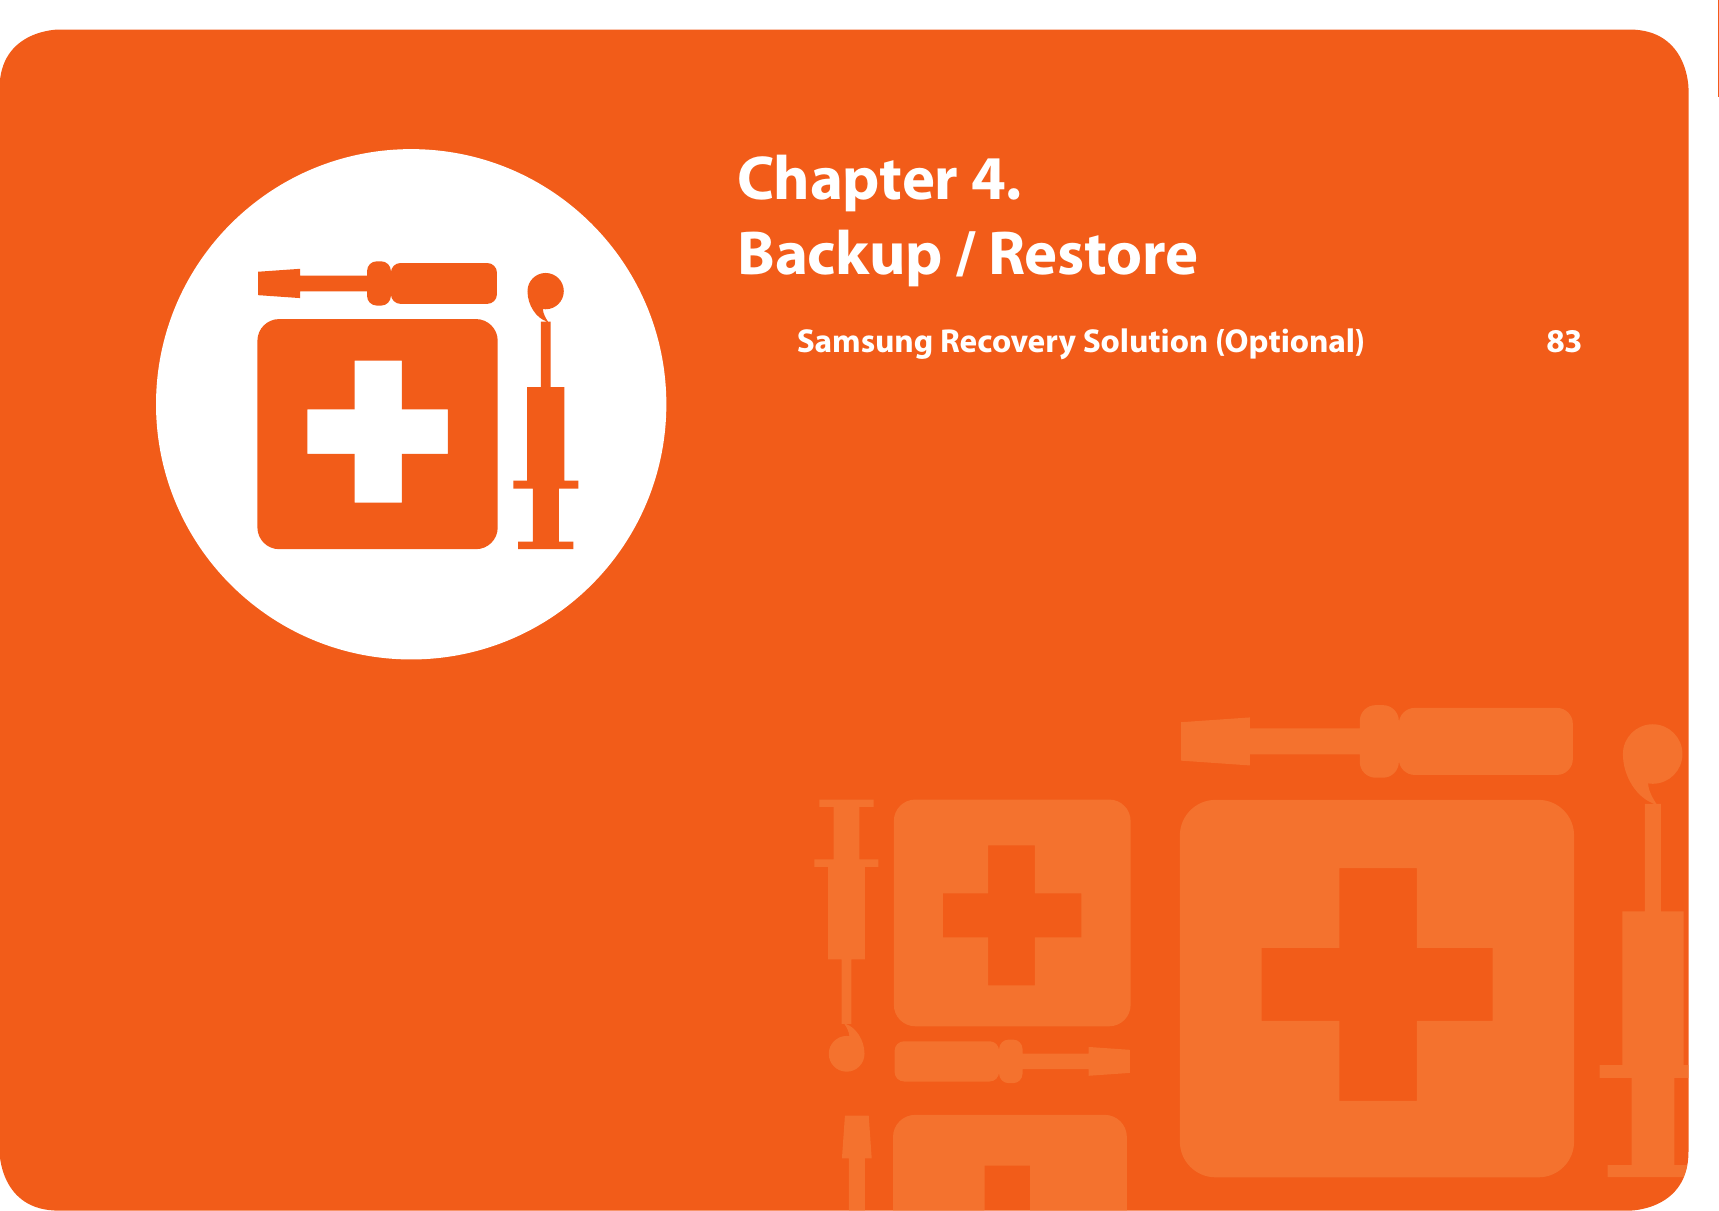  Chapter 4. Backup / RestoreSamsung Recovery Solution (Optional)  83